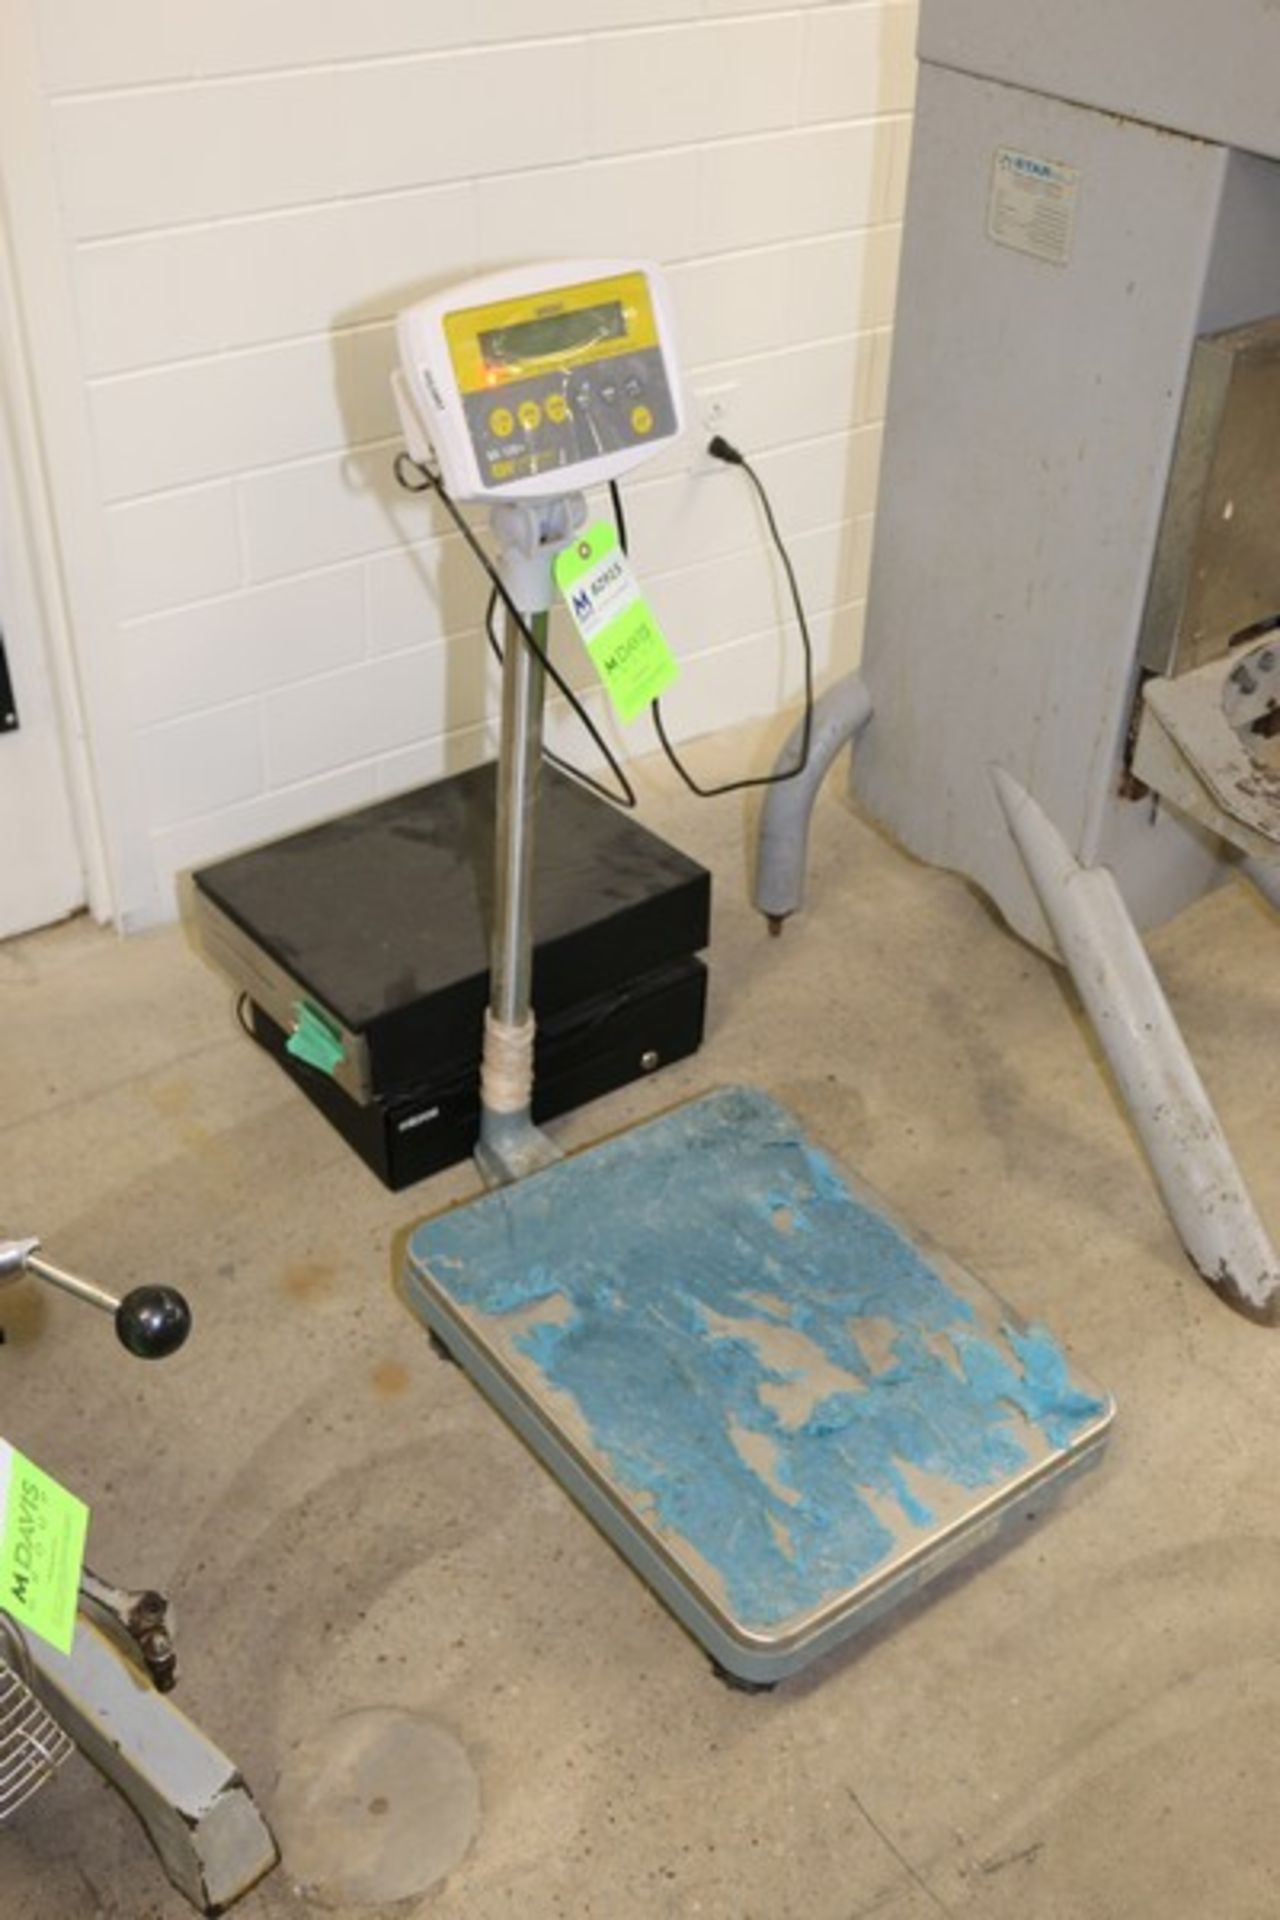 BW Easy Weigh Digital Platform Scale, M/N BX-120x, with (2) Micros Black Boxes, with Aprox. 20-1/ - Image 2 of 3